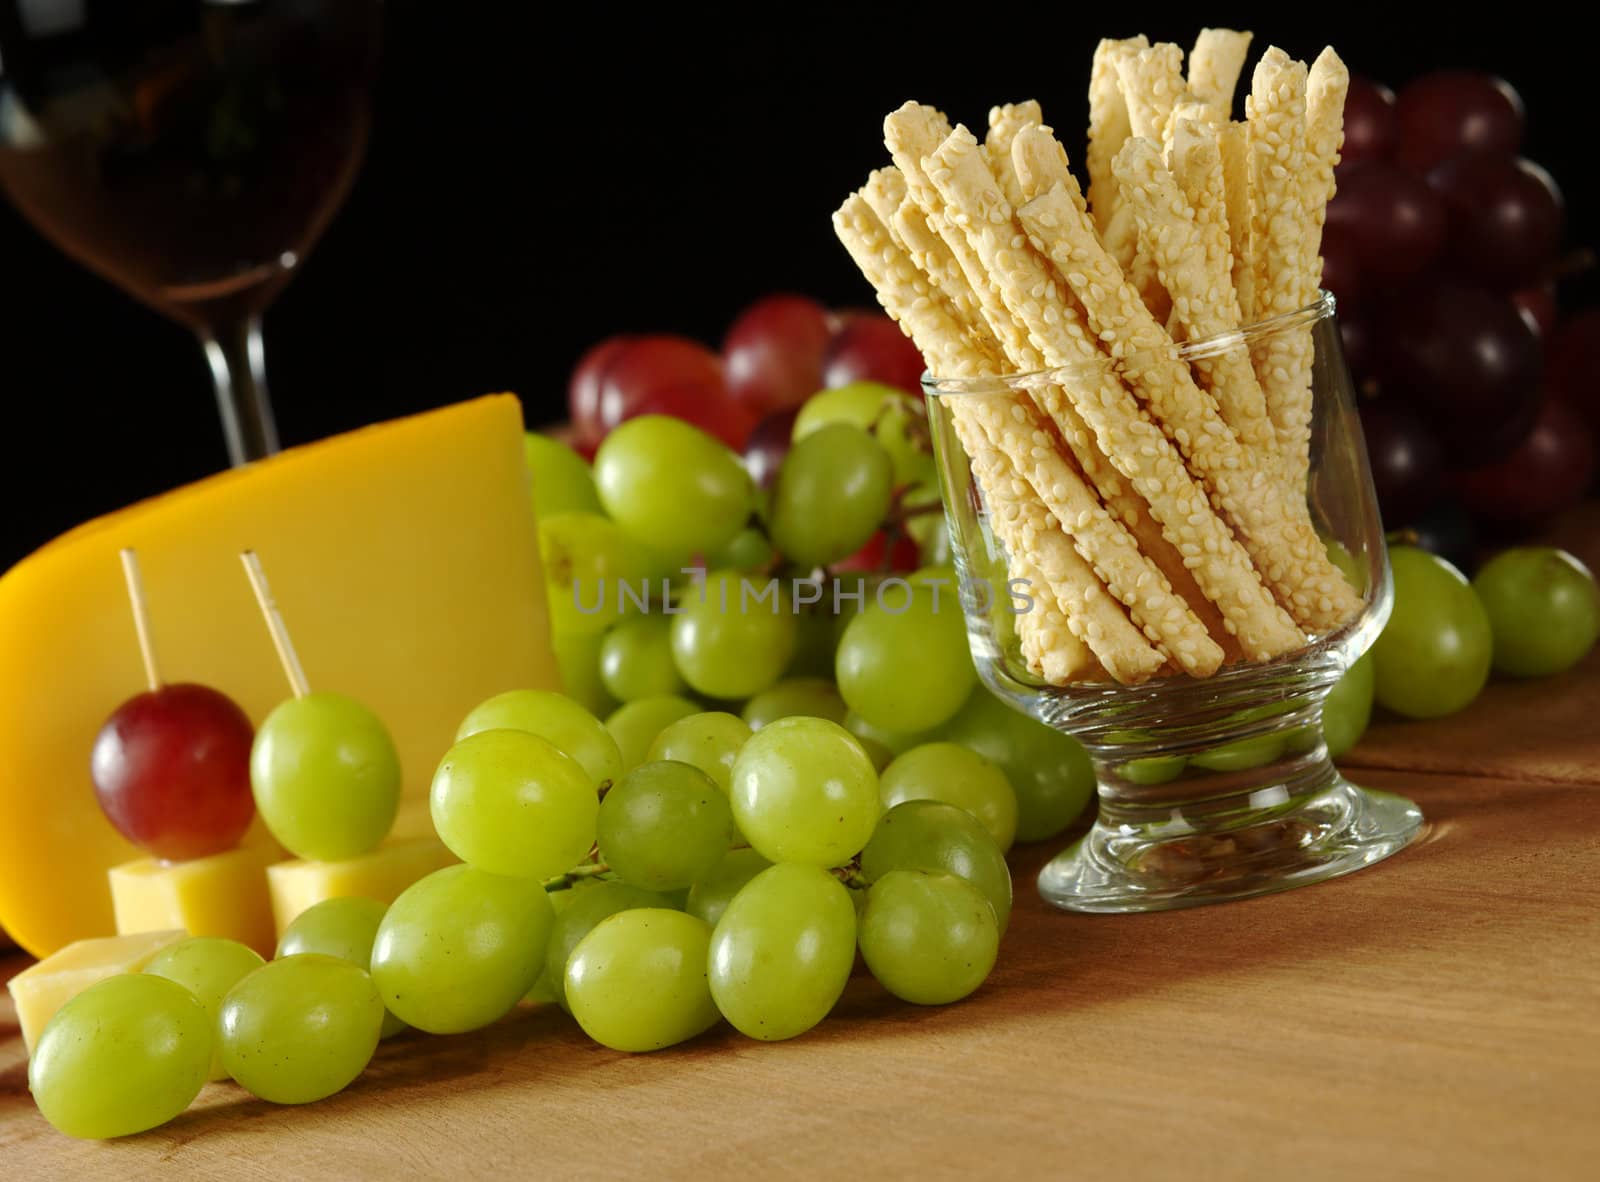 Snack: Sesame sticks with white grapes, some red grapes, cheese and red wine in glass in the background on wooden board (Selective Focus, Focus on the sesame sticks)